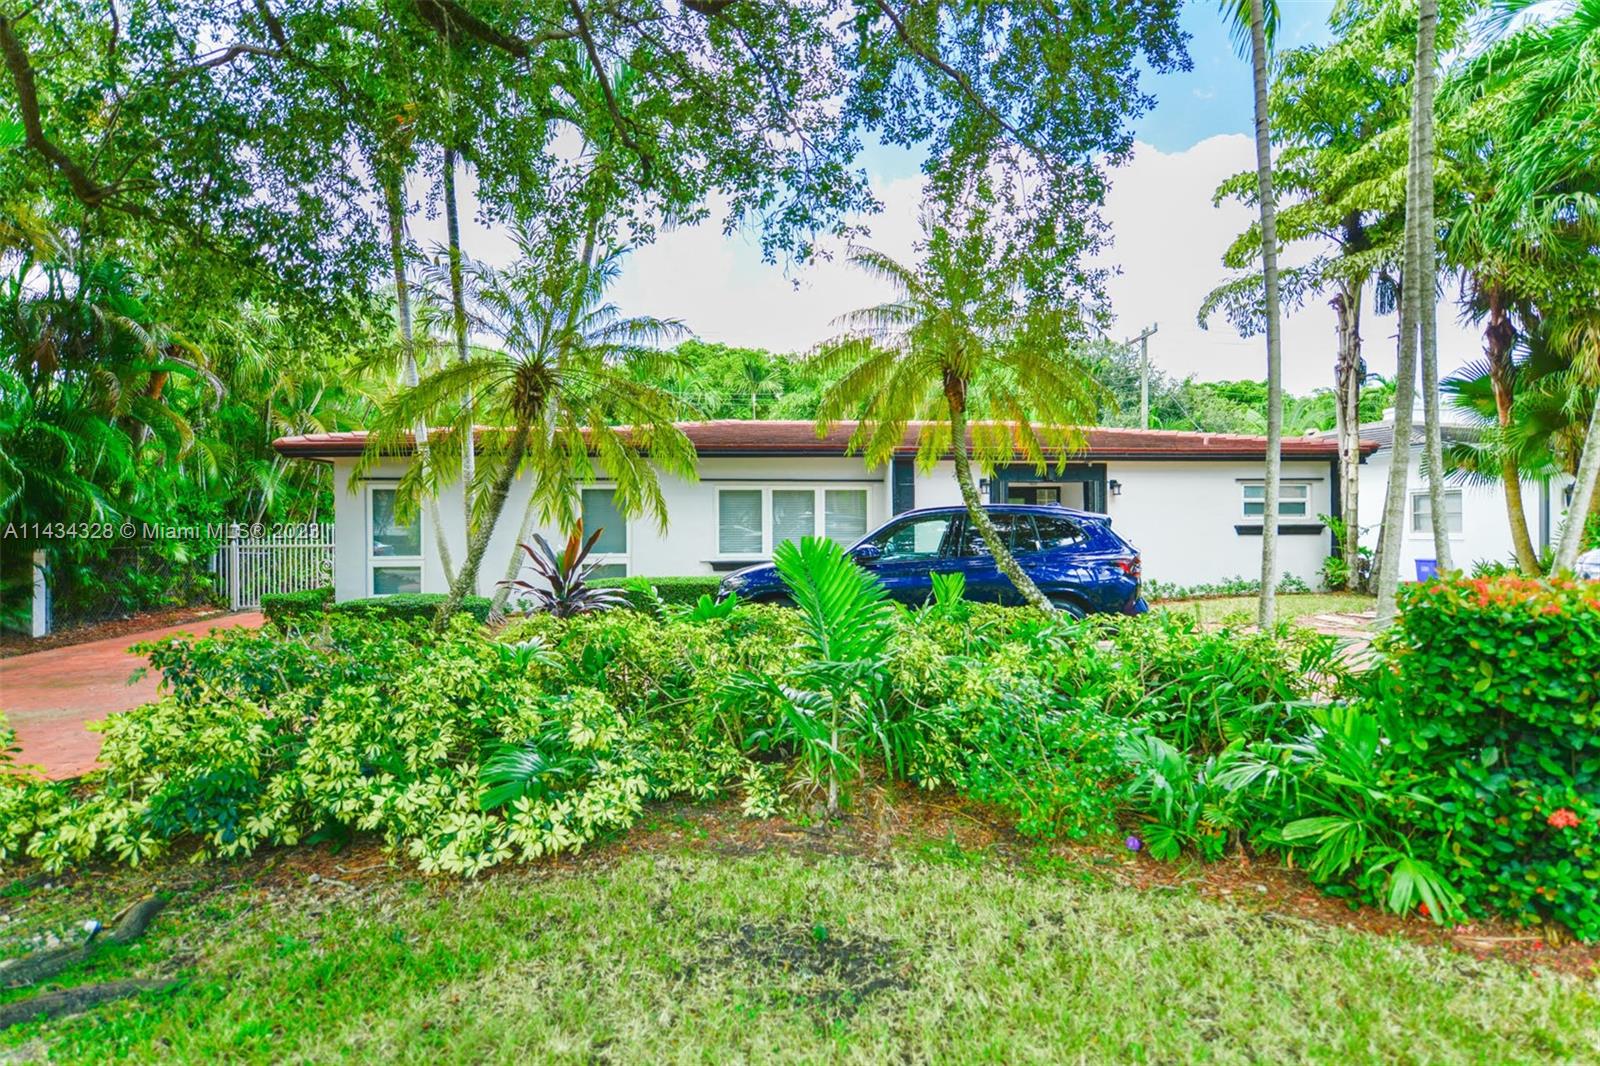 Photo 40 of 1535 Blue Rd in Coral Gables - MLS A11434328